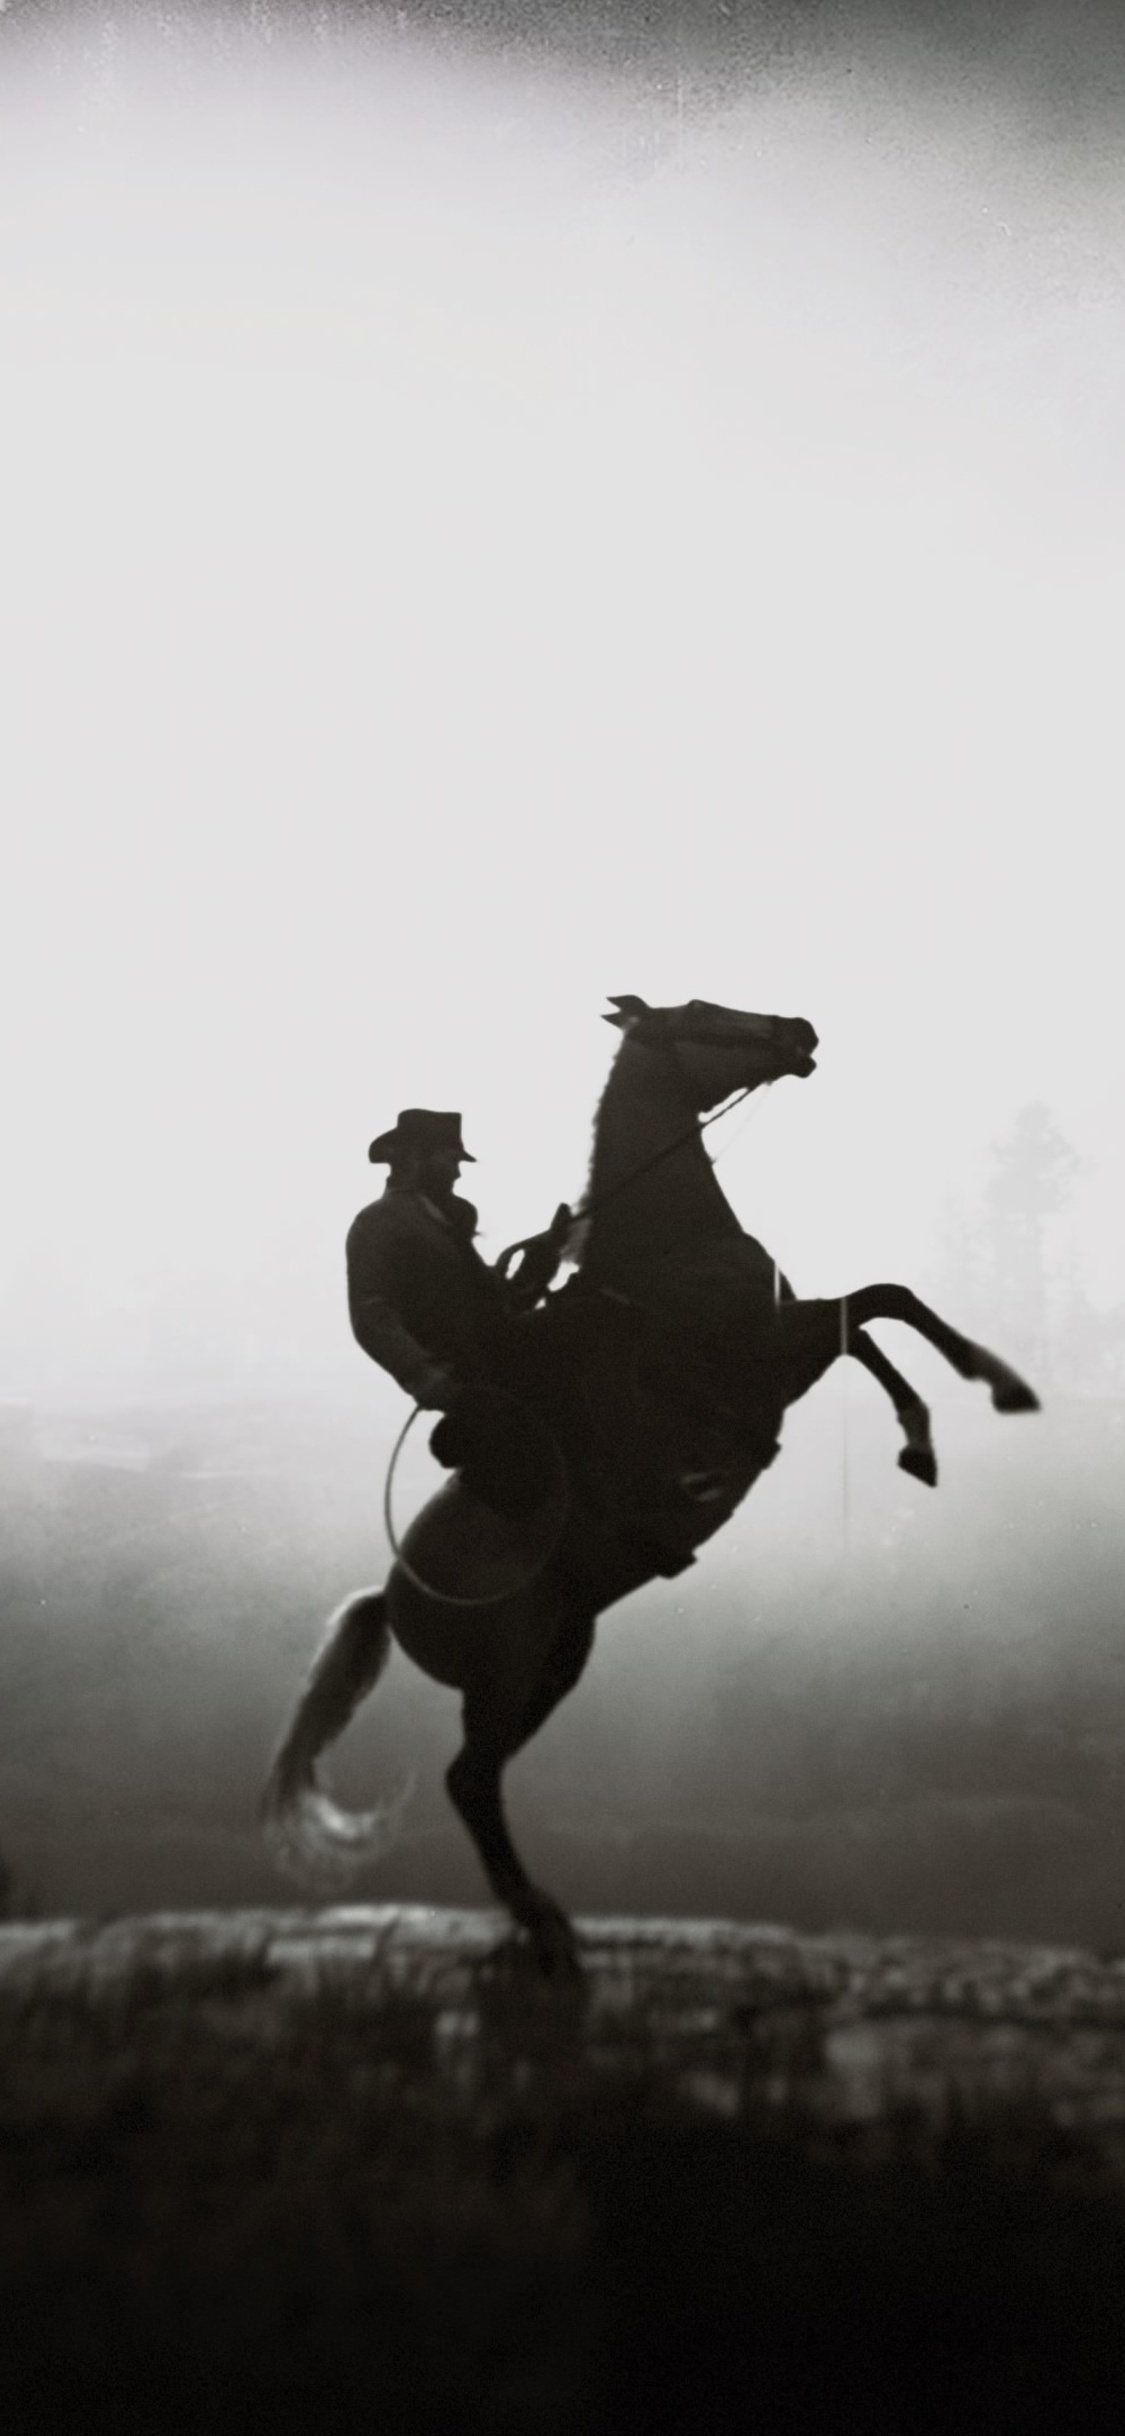 Equitation: Horse riding in Red Dead Redemption 2 video game, Monochrome fan art. 1130x2440 HD Background.